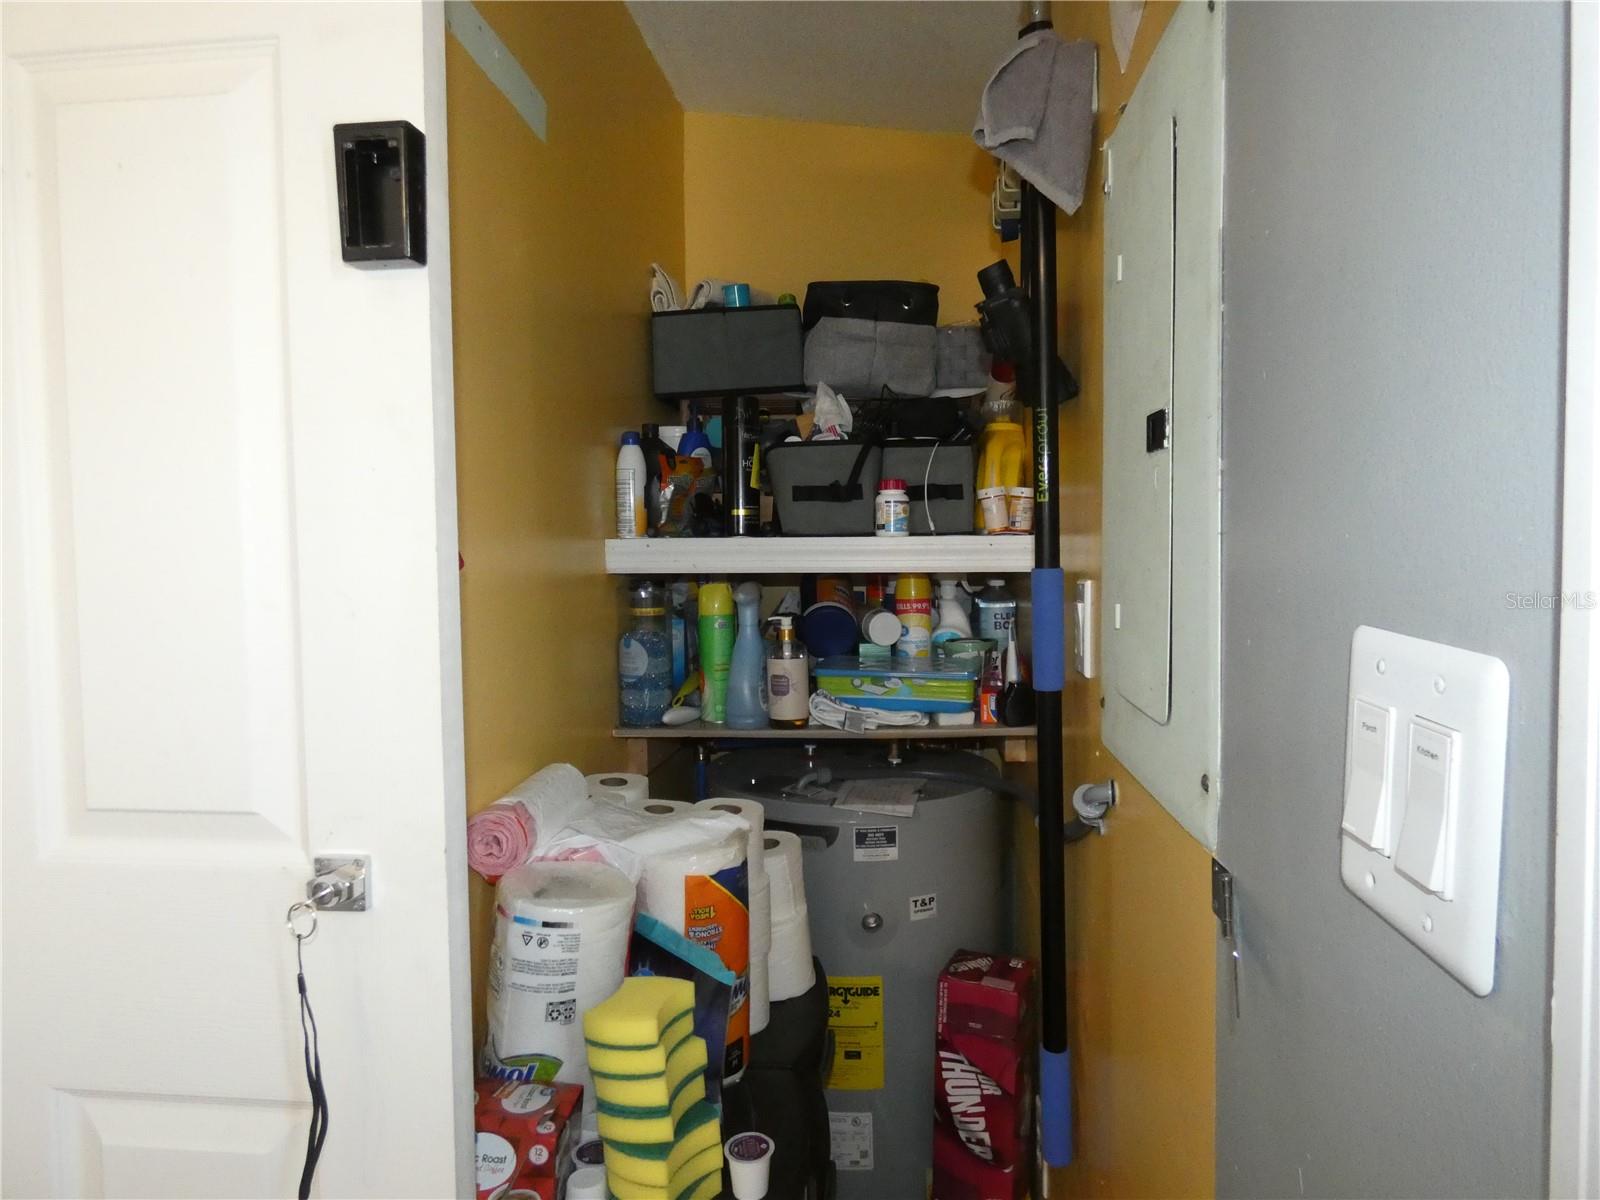 Storage room/pantry/new water heater has a cool decorative barn door that is locked and located next to washer/dryer.